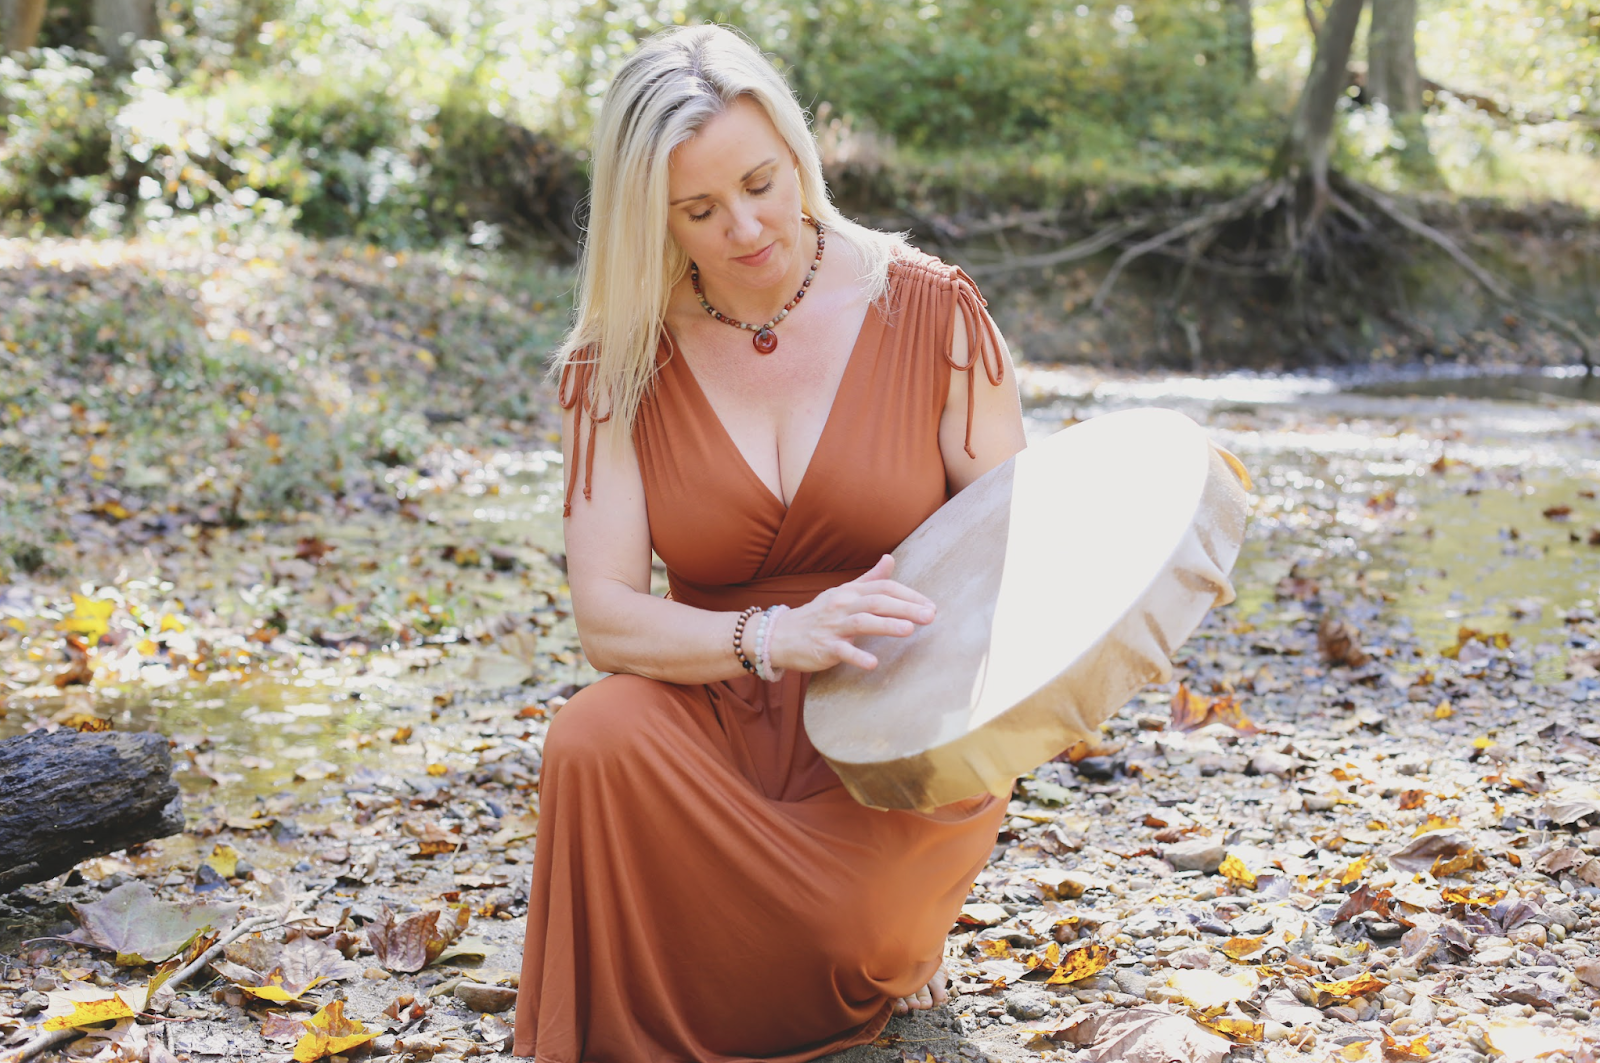 Spiritual counselor beating a drum during an experiential healing session